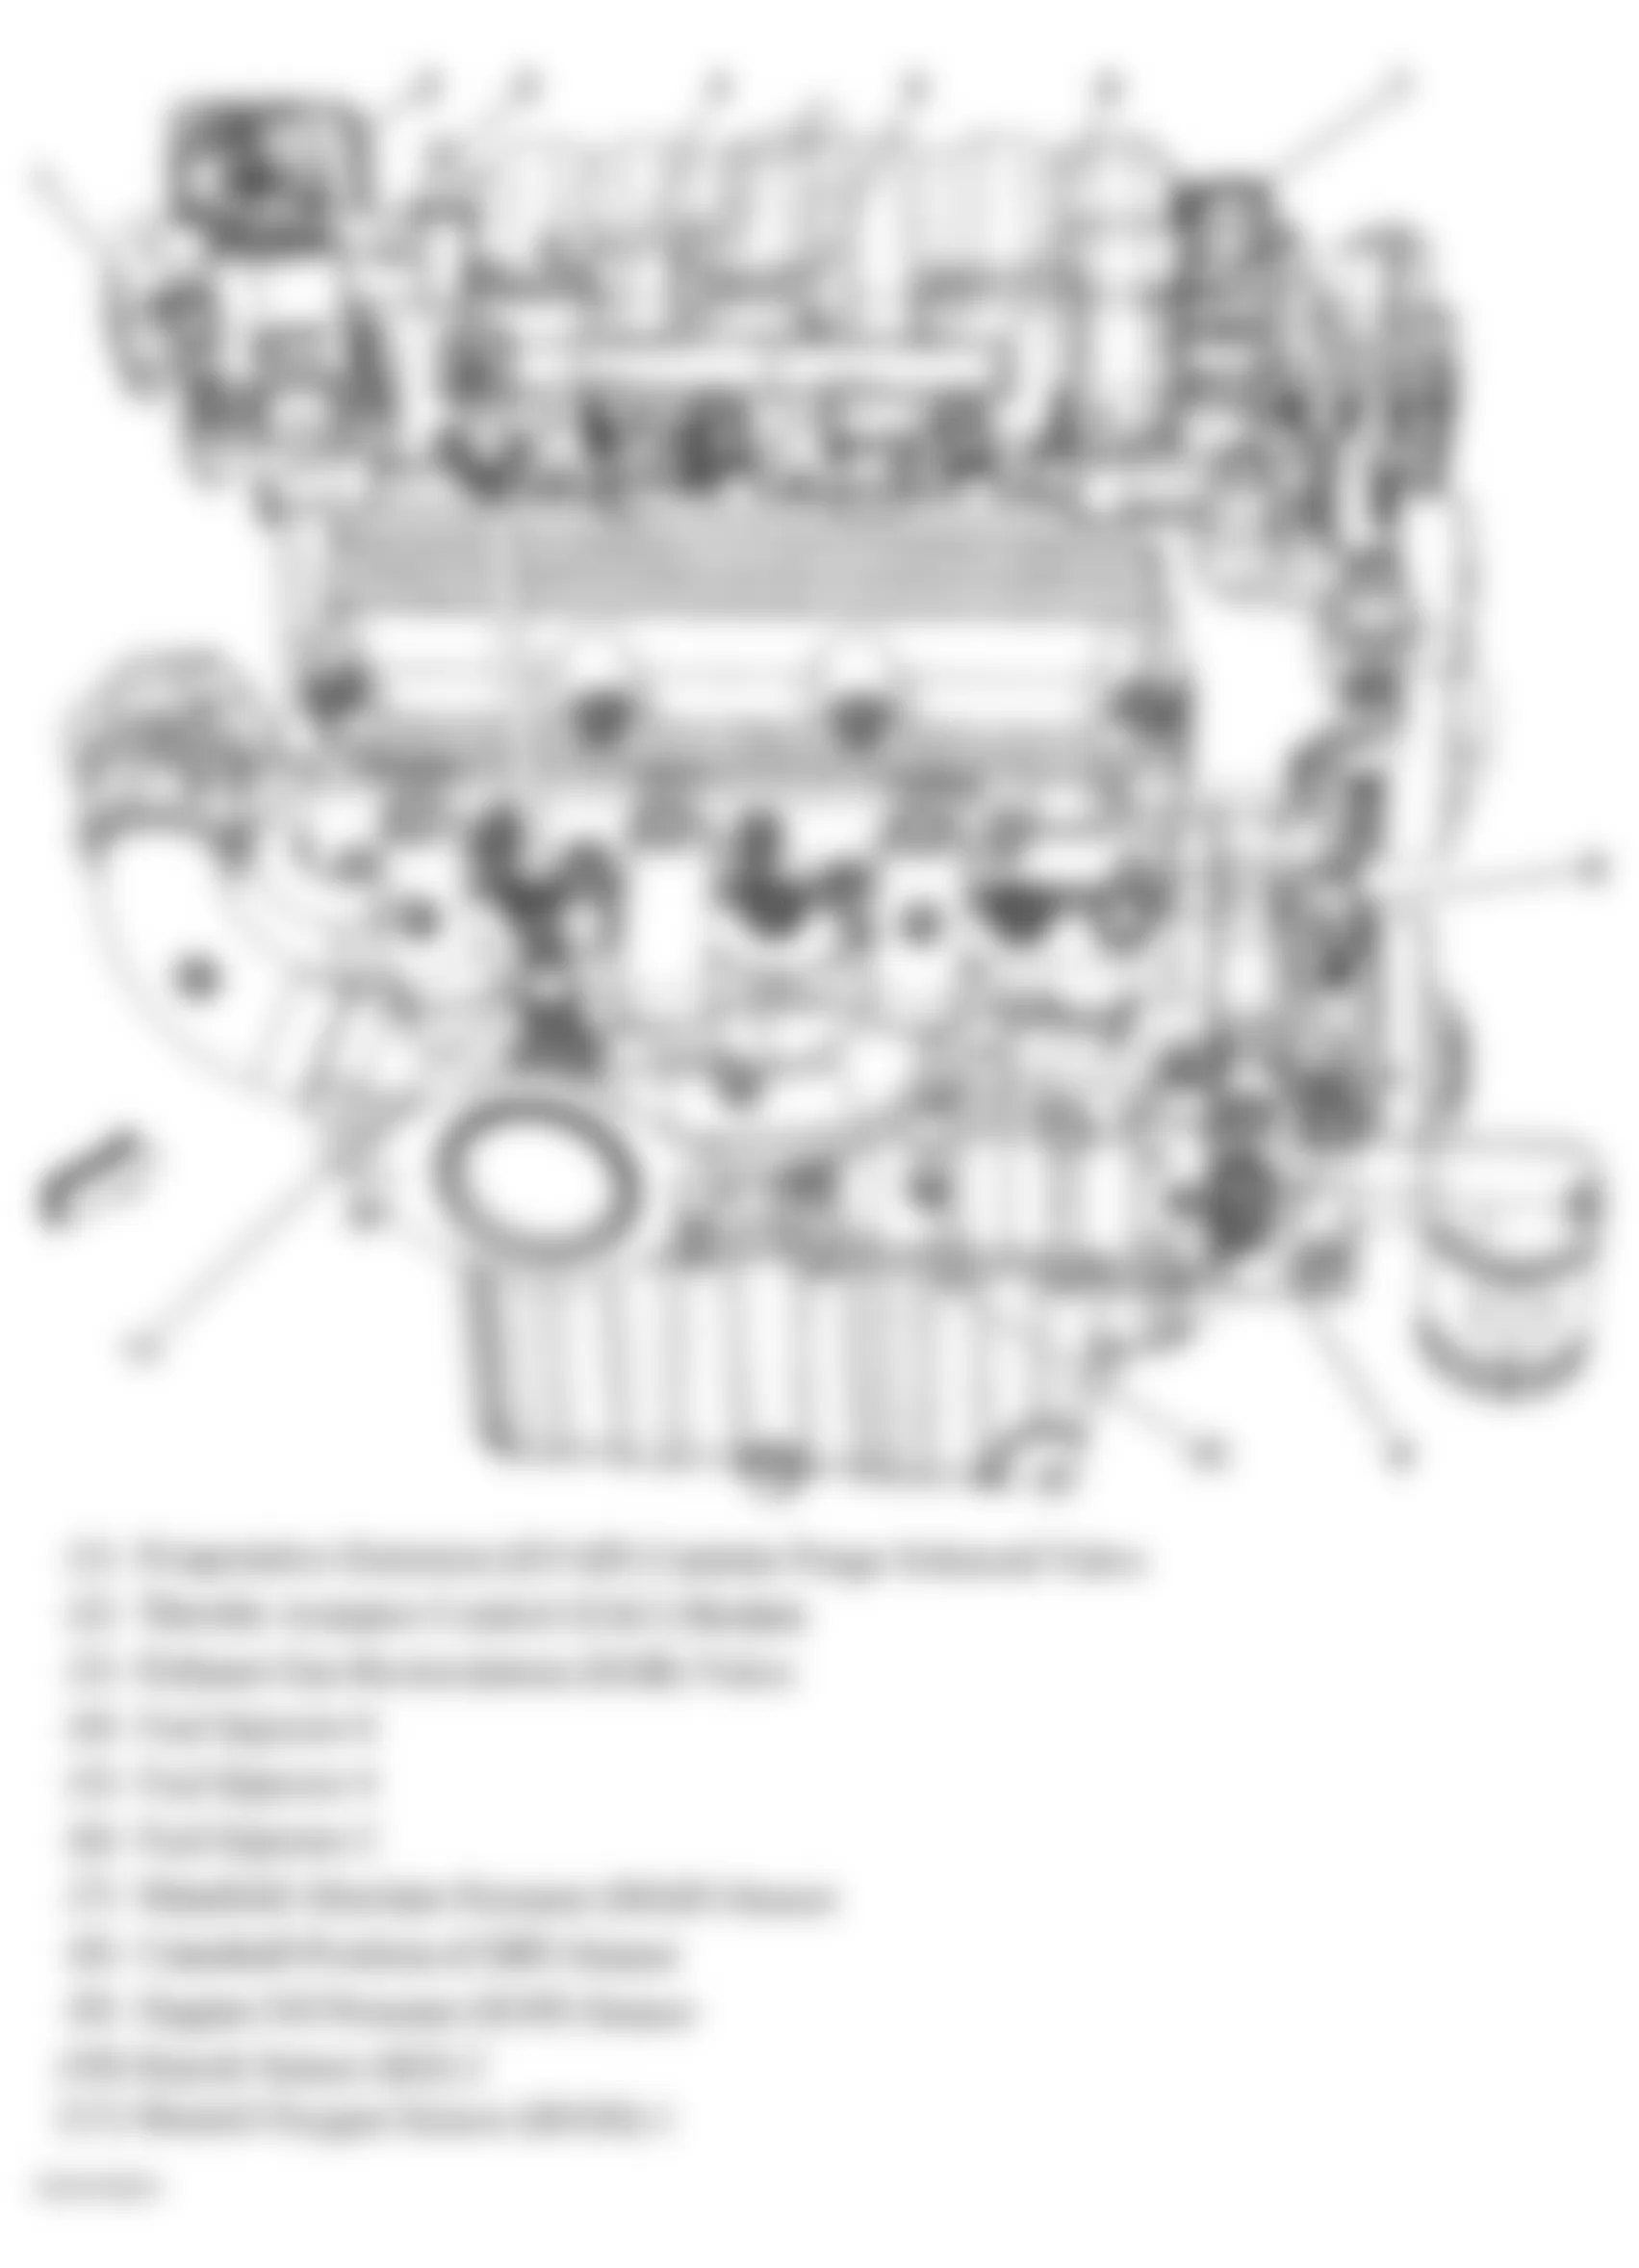 Buick Lucerne Super 2008 - Component Locations -  Right Side Of Engine (3.8L)